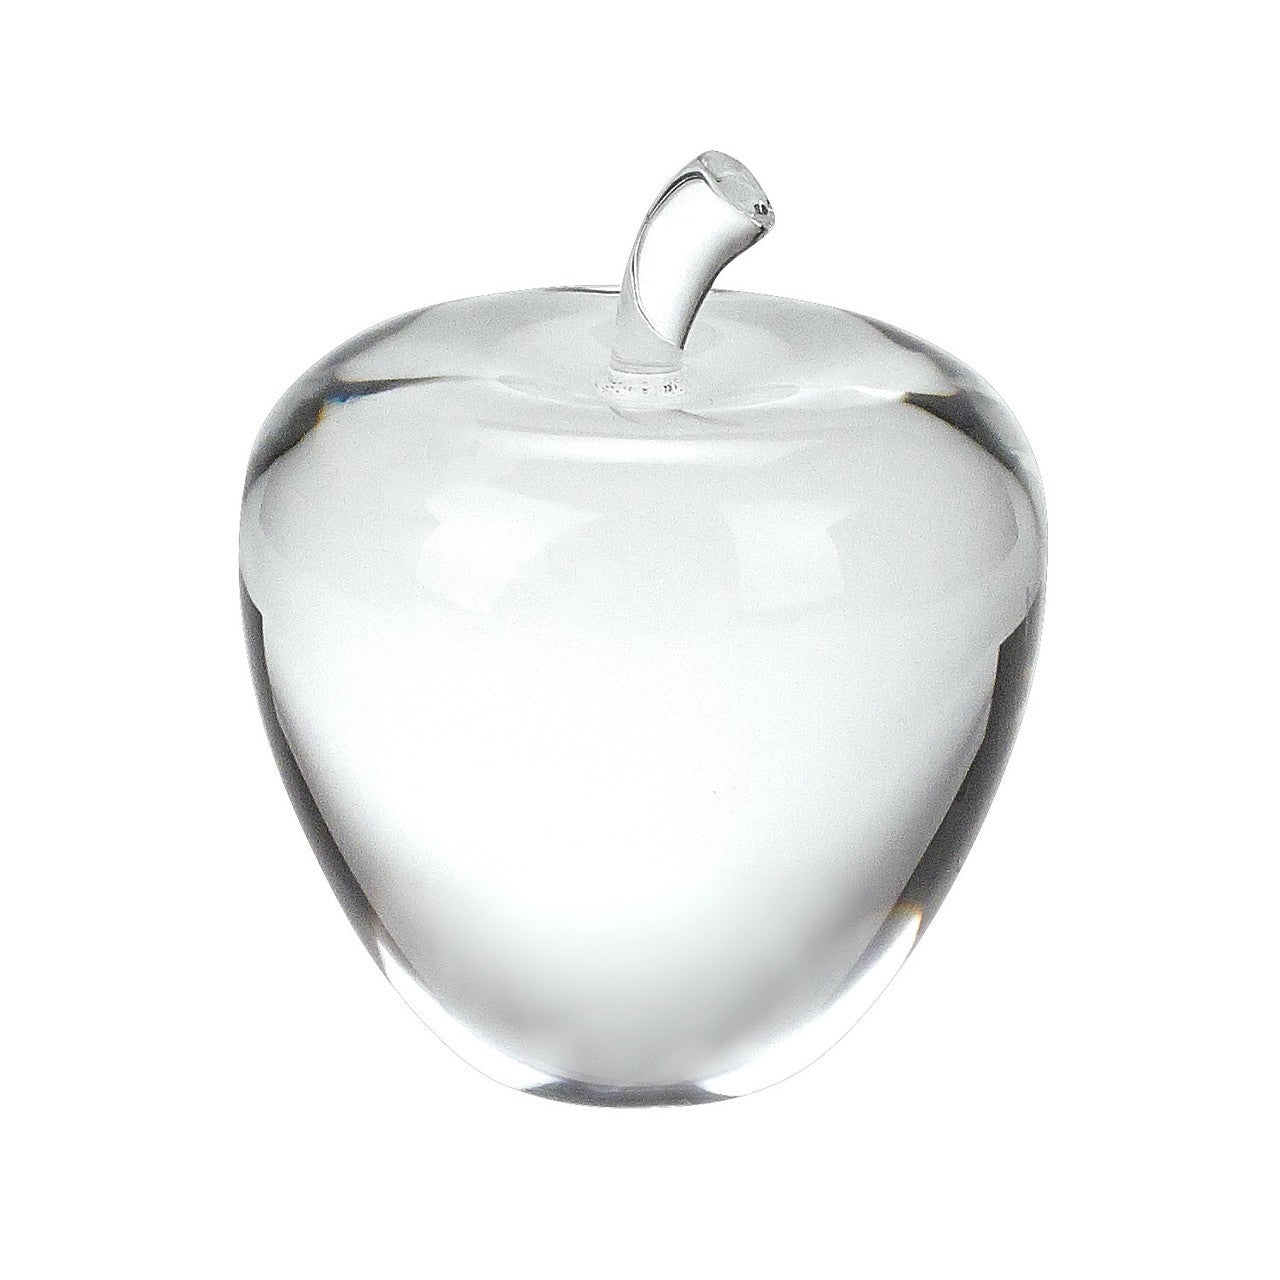 Crystal Apple 3.5 inches Tall